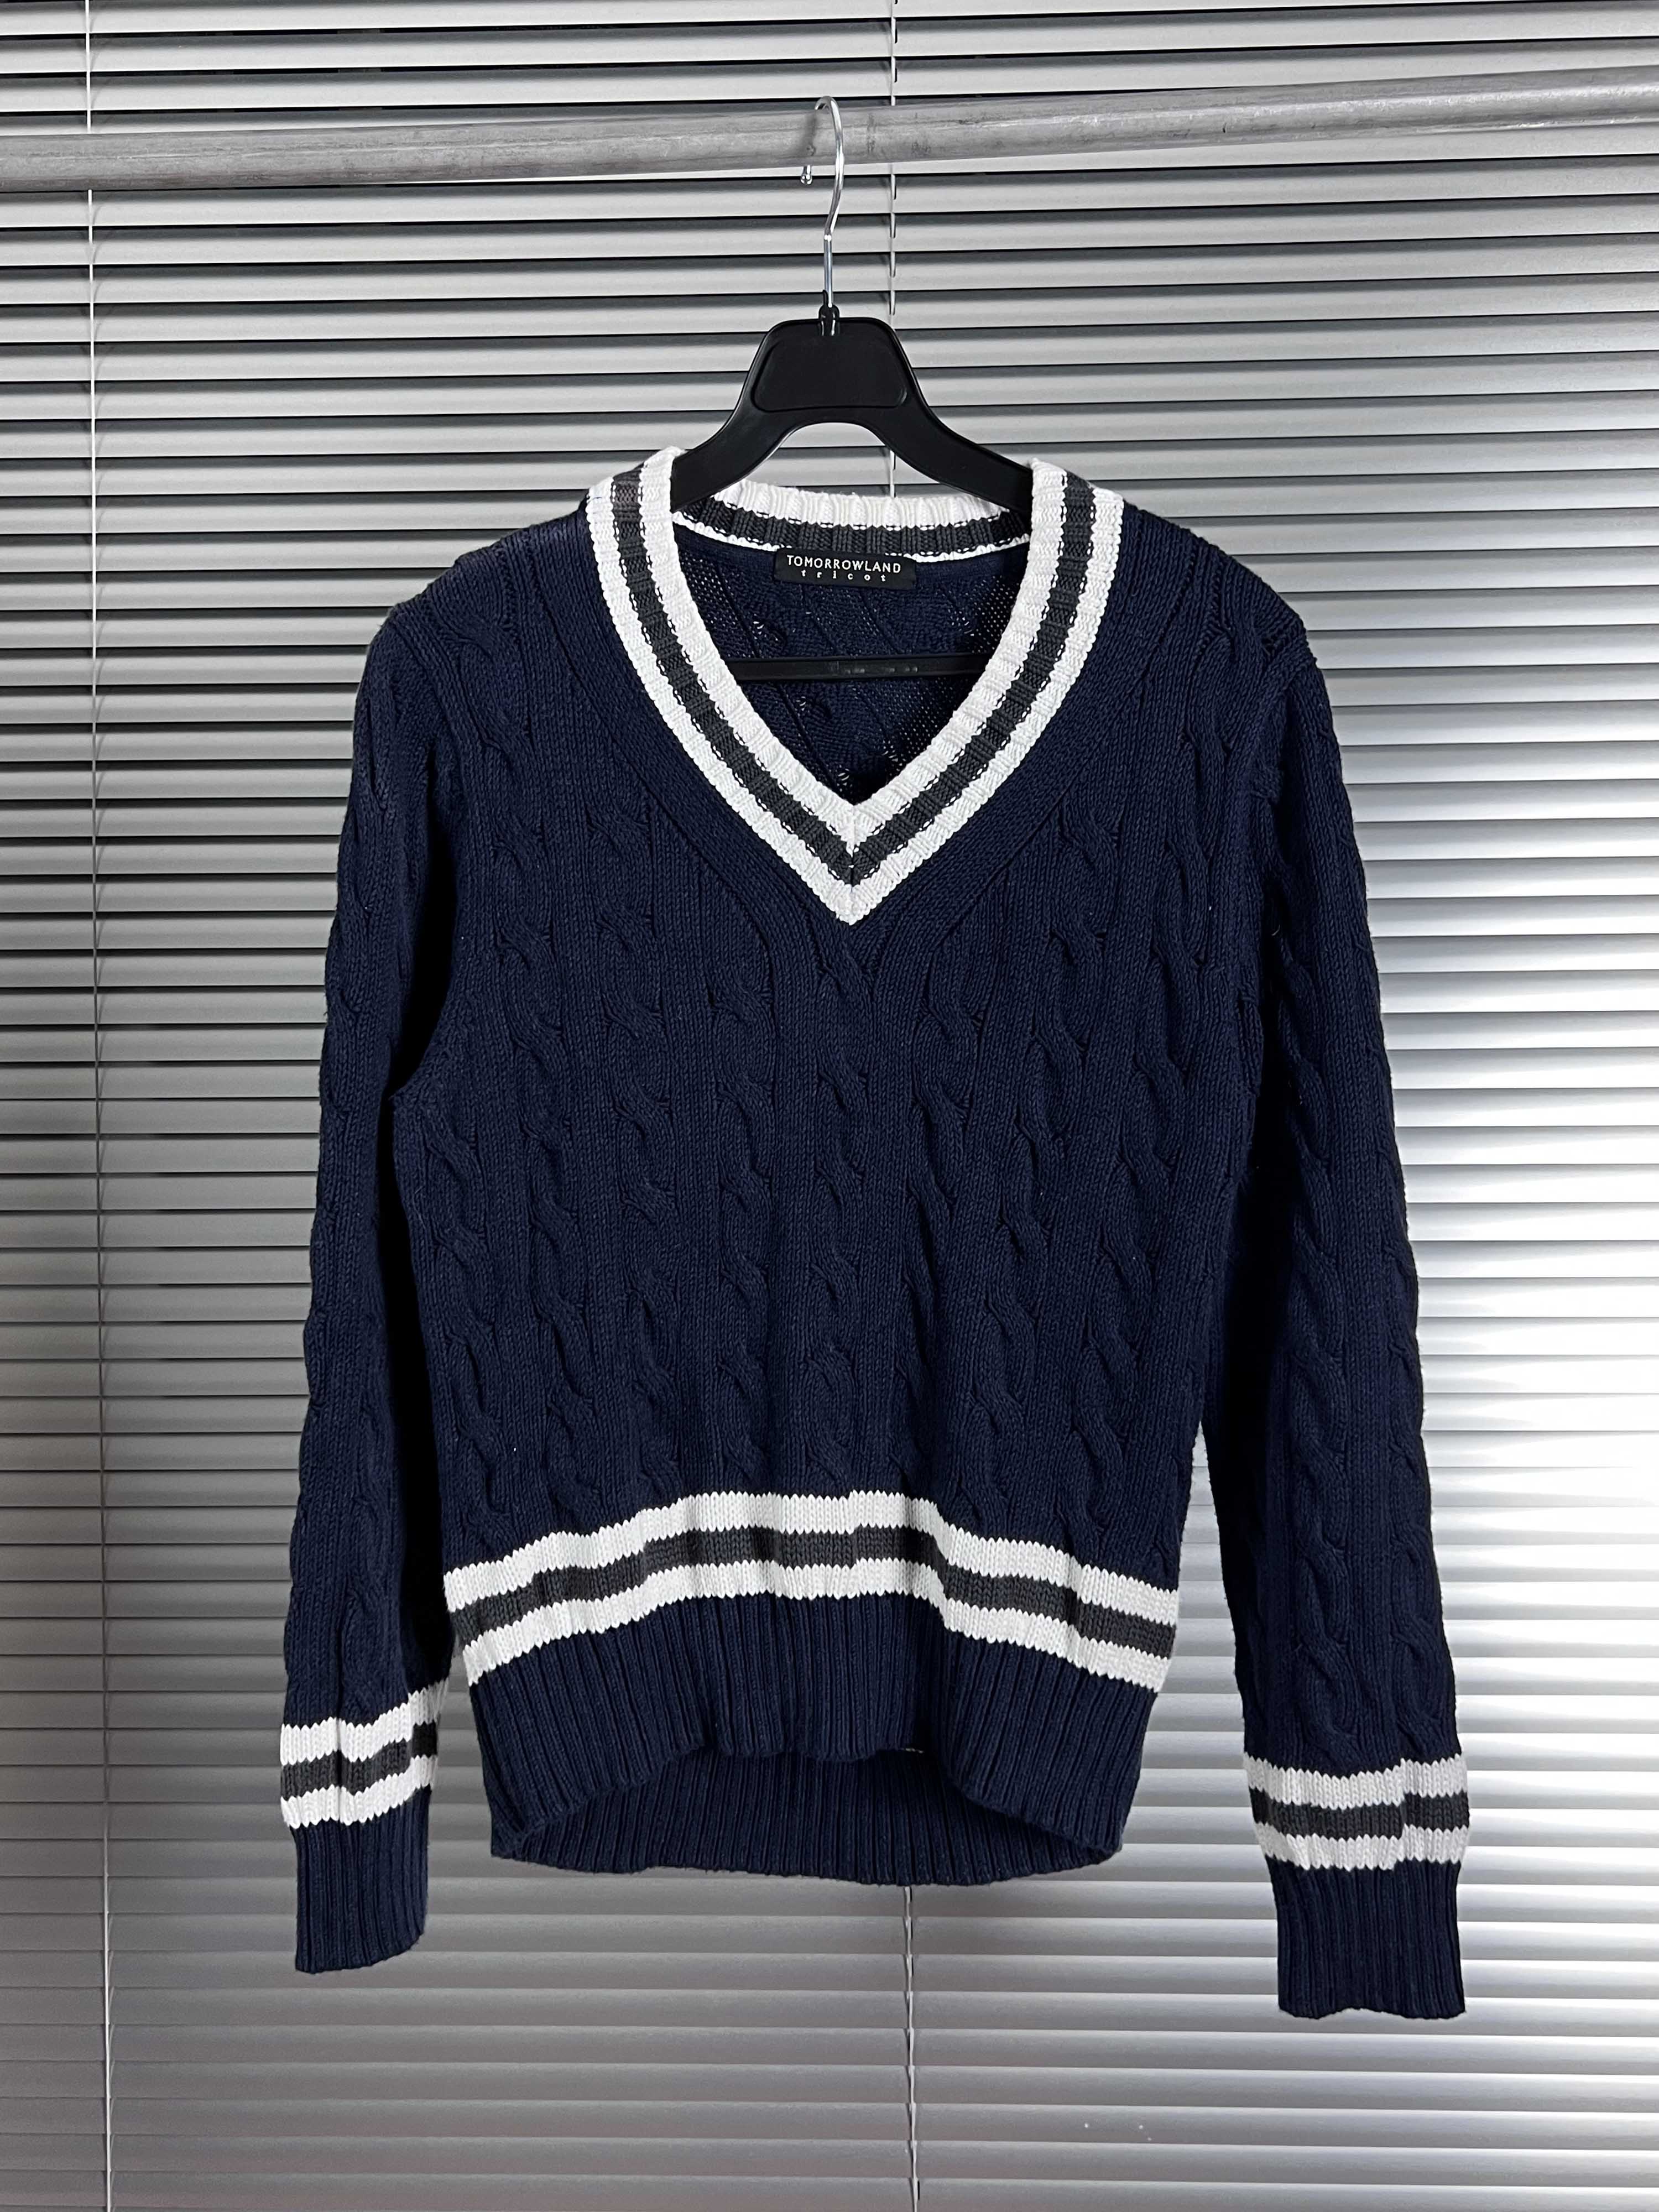 TOMMROWLAND tricot cricket knit